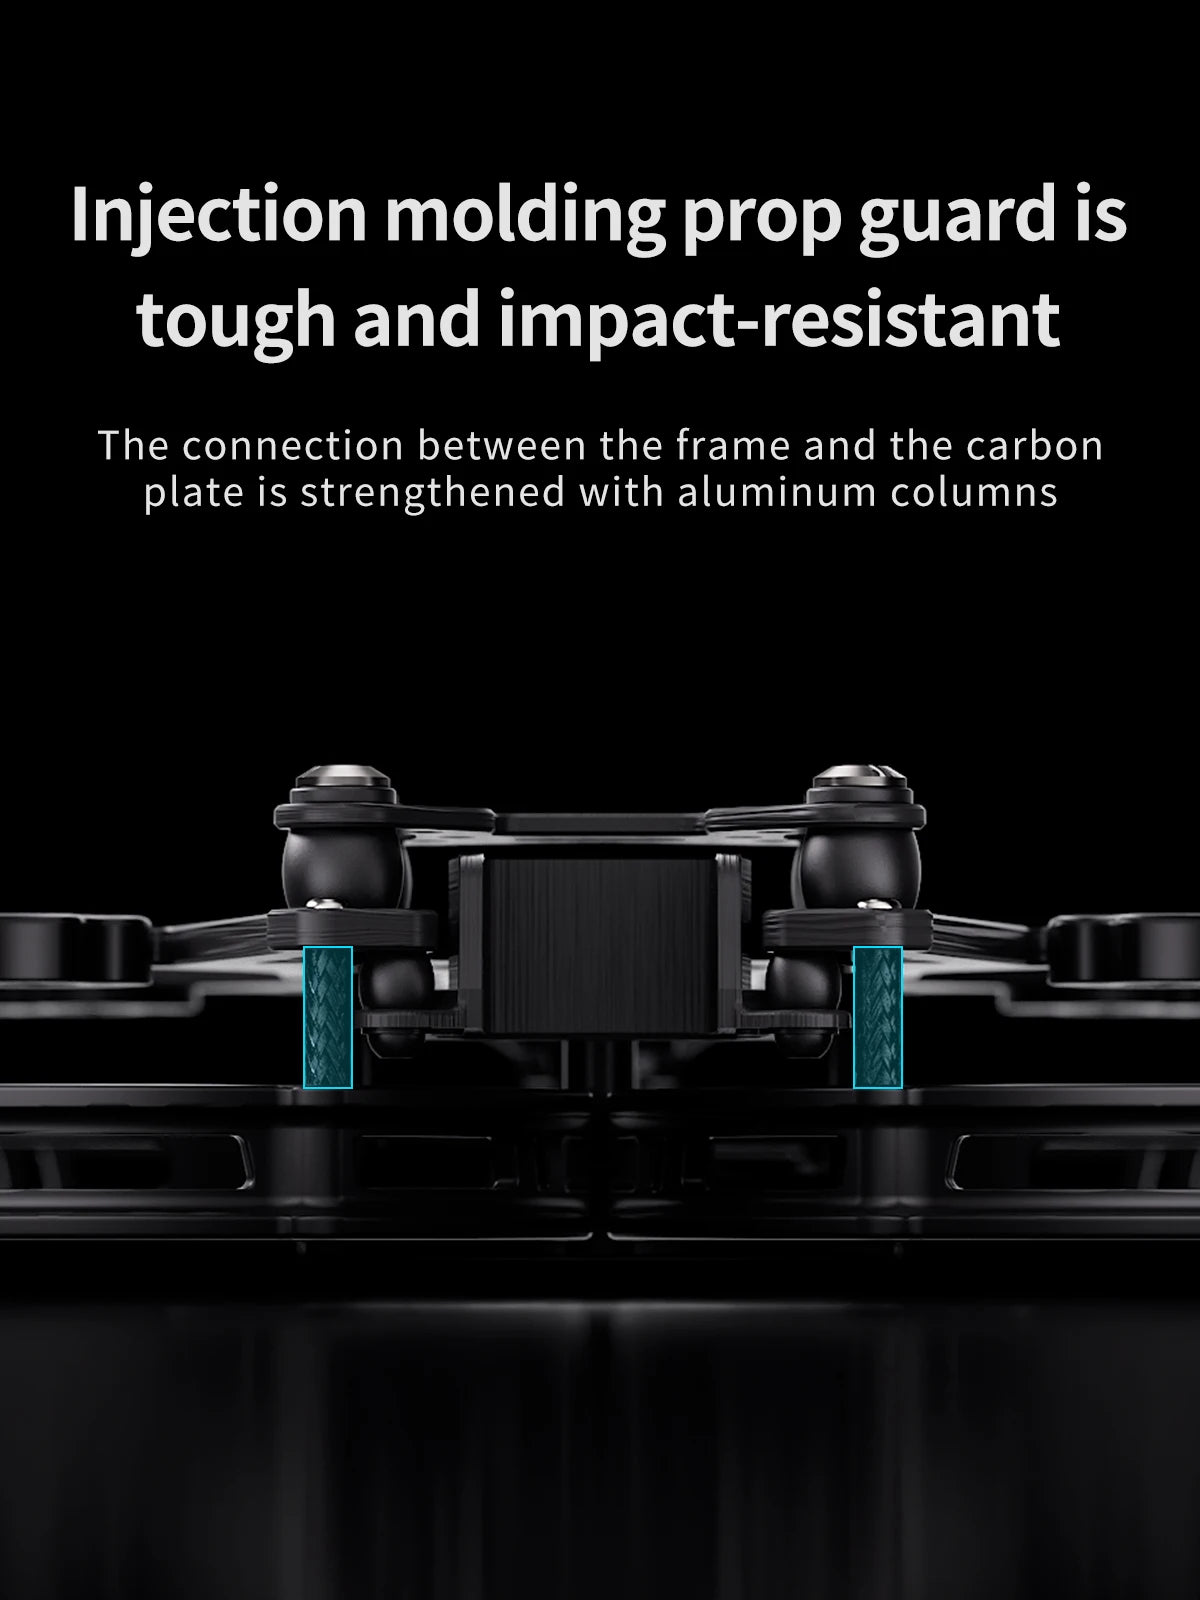 prop guard is tough and impact-resistant The connection between the frame and the carbon plate is strengthened